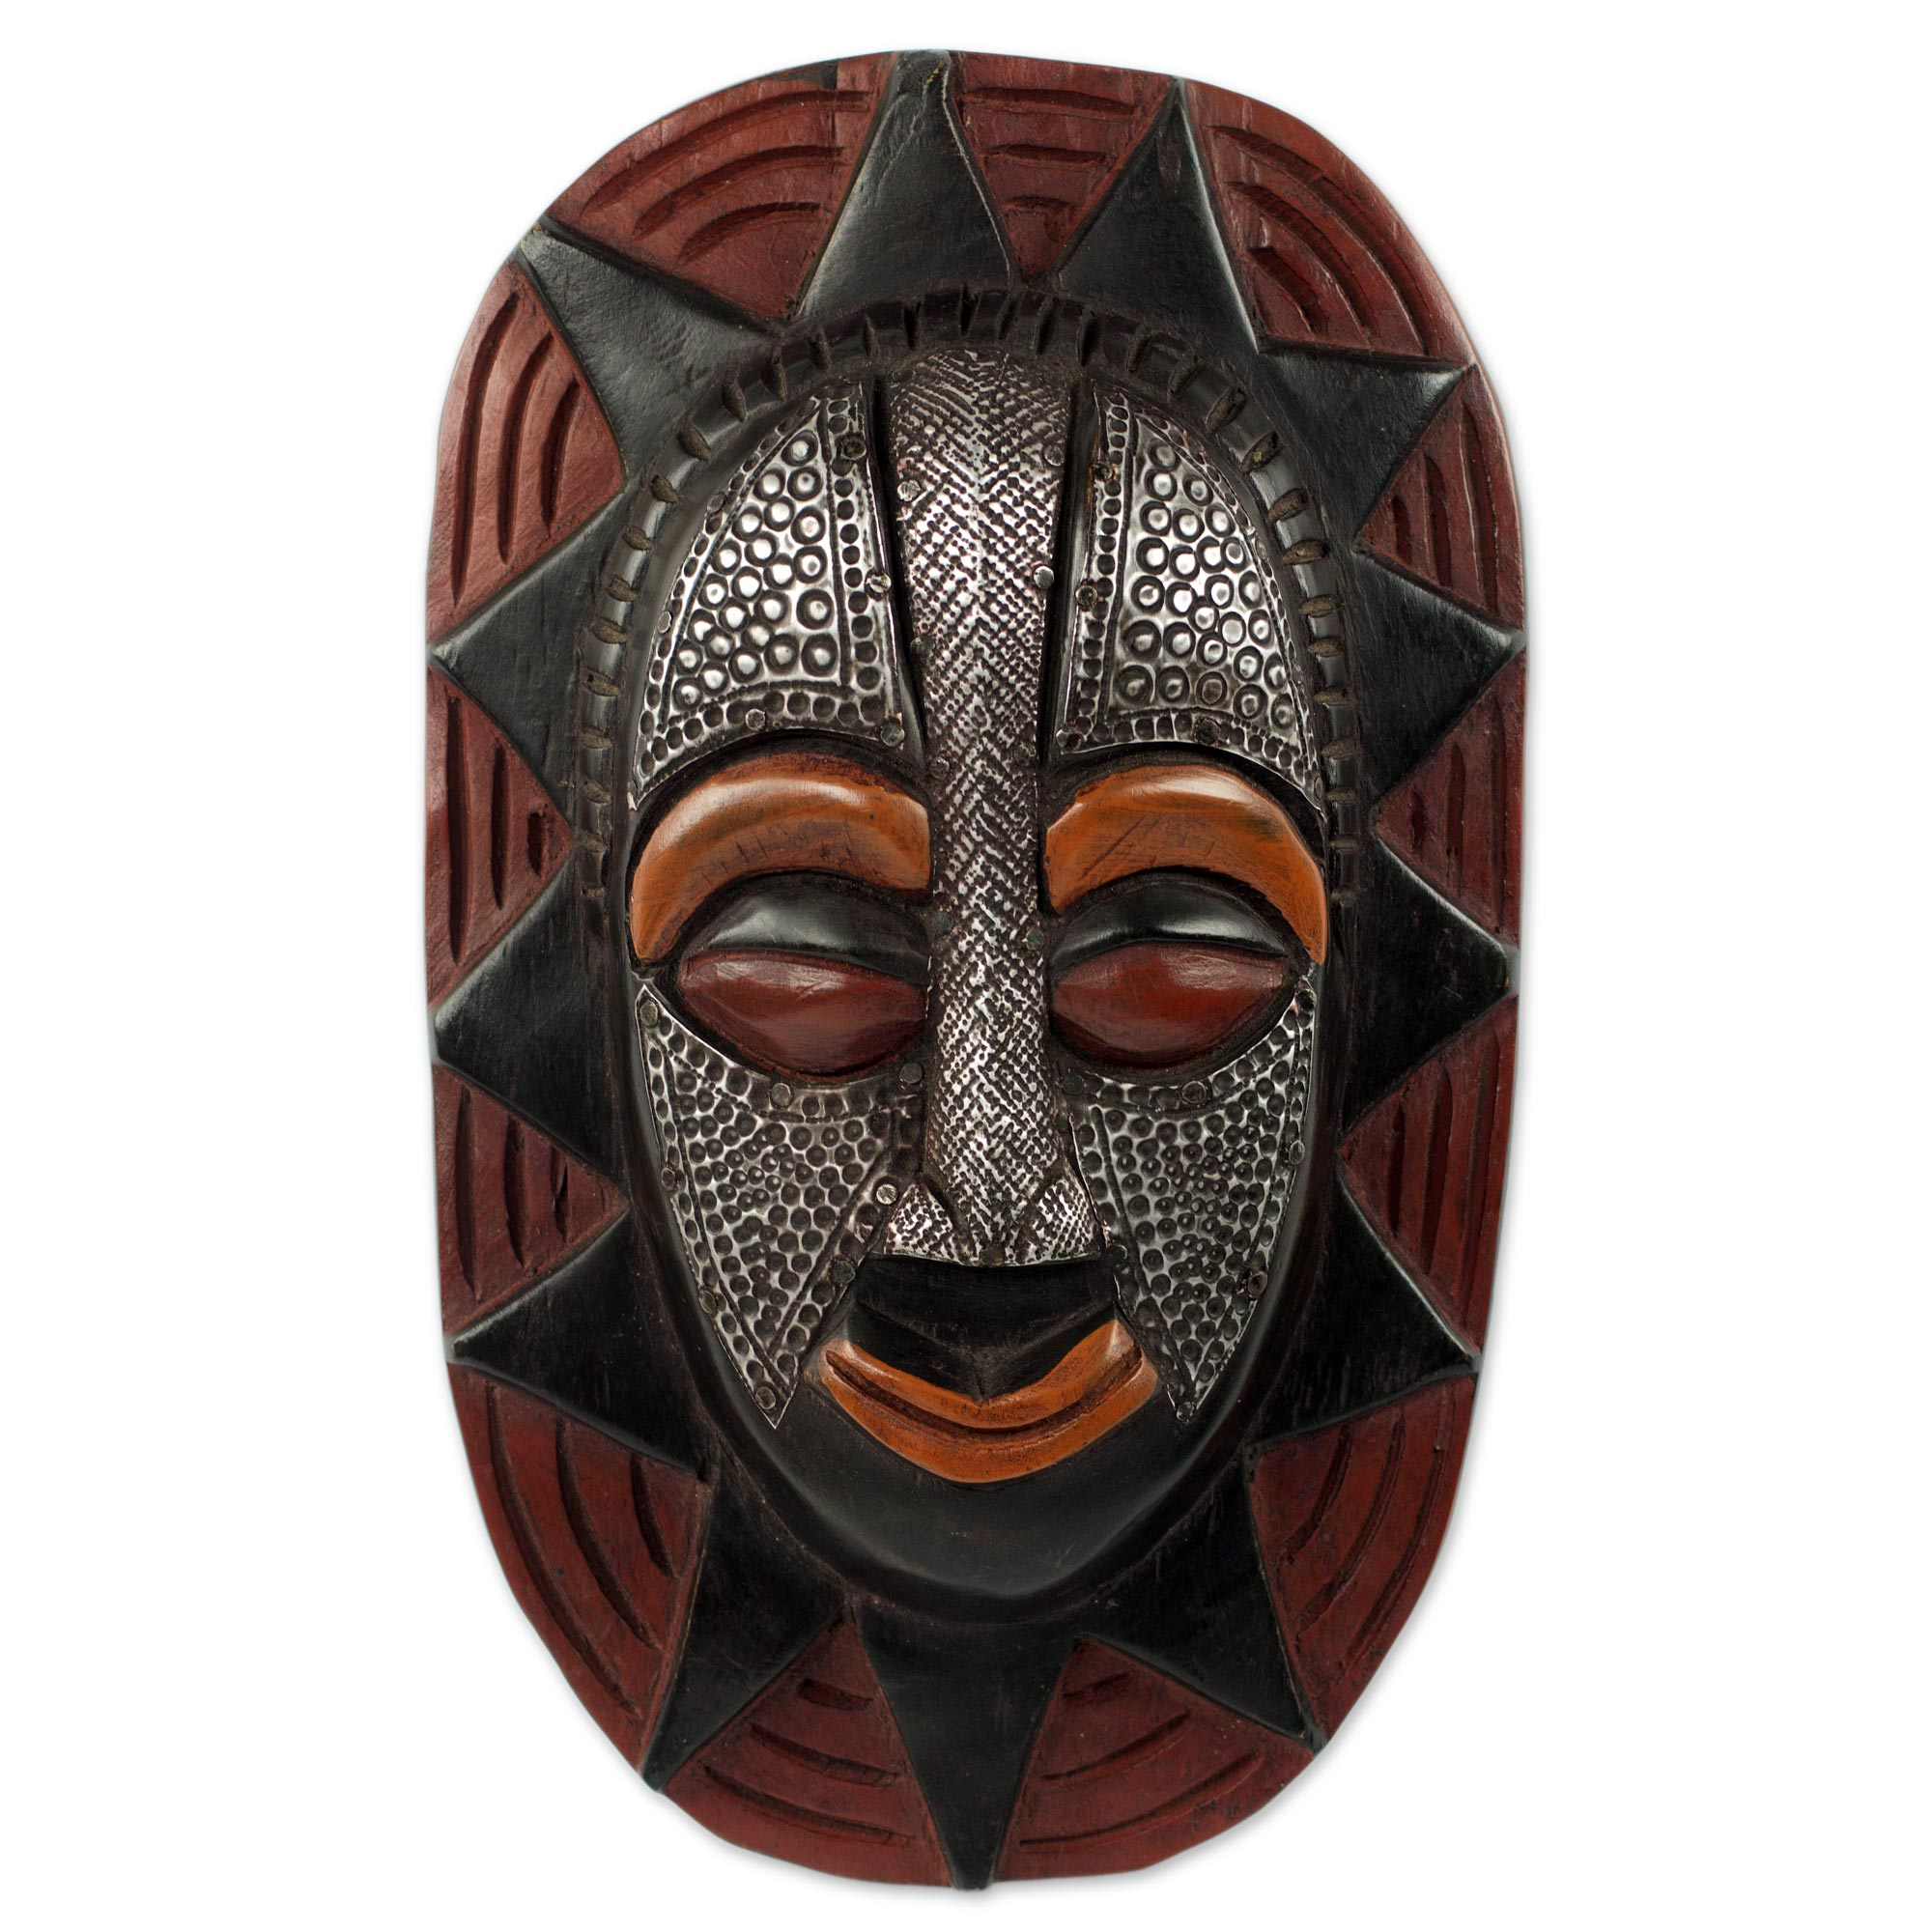 Dazzling Wood Mask with Aluminum Adornment and Dark Color - Sun Mask ...